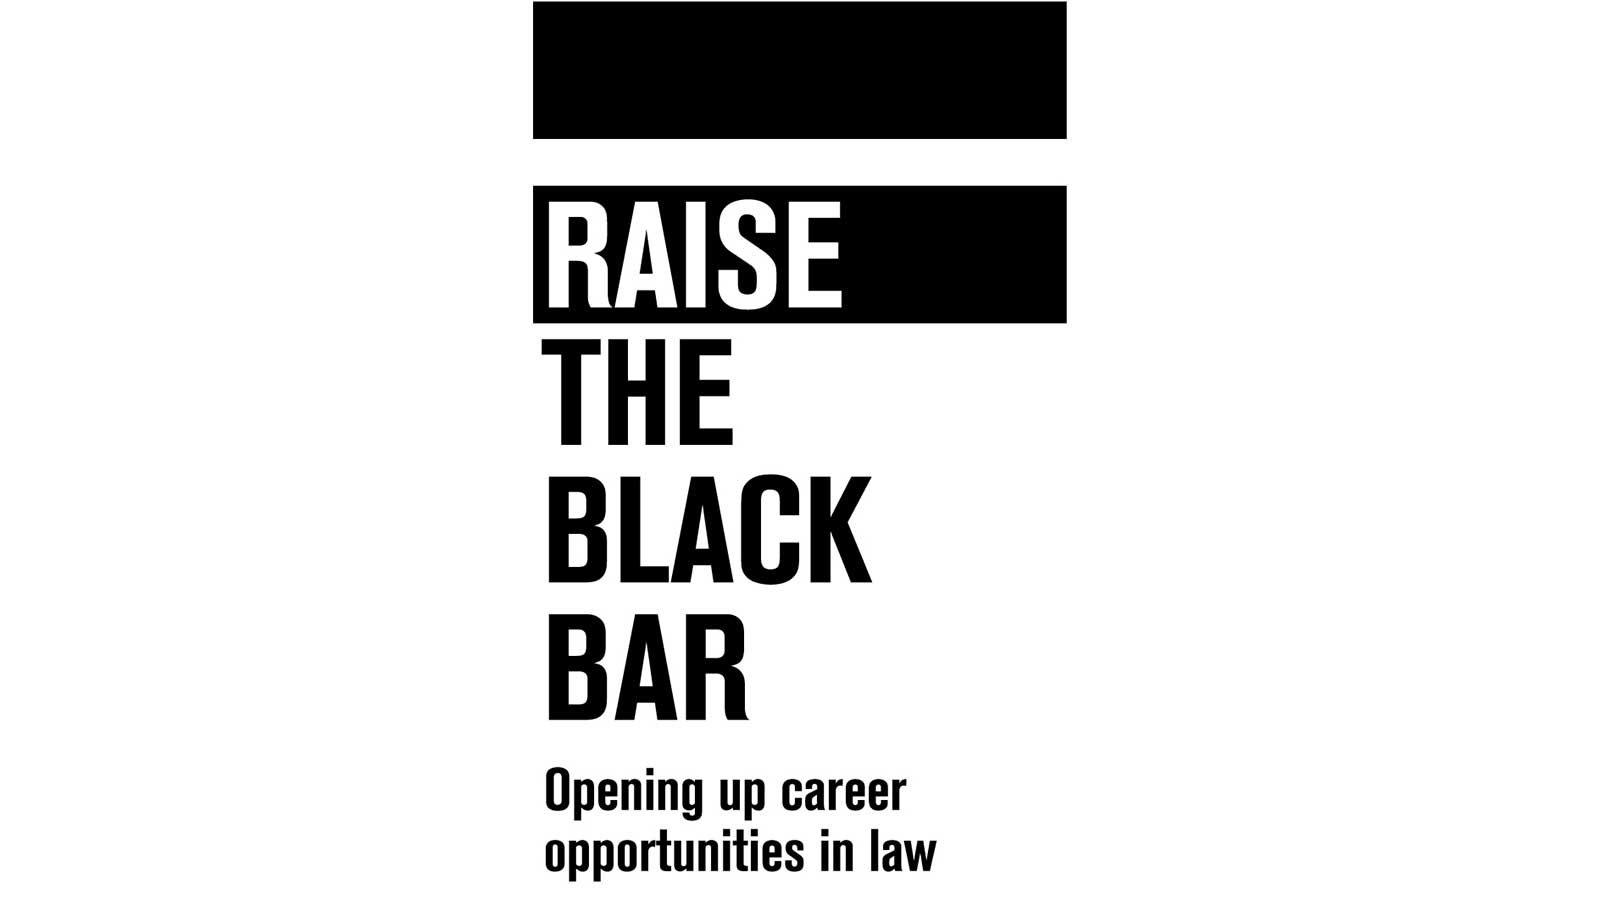 Raise the Black Bar. Opening up career opportunities in law